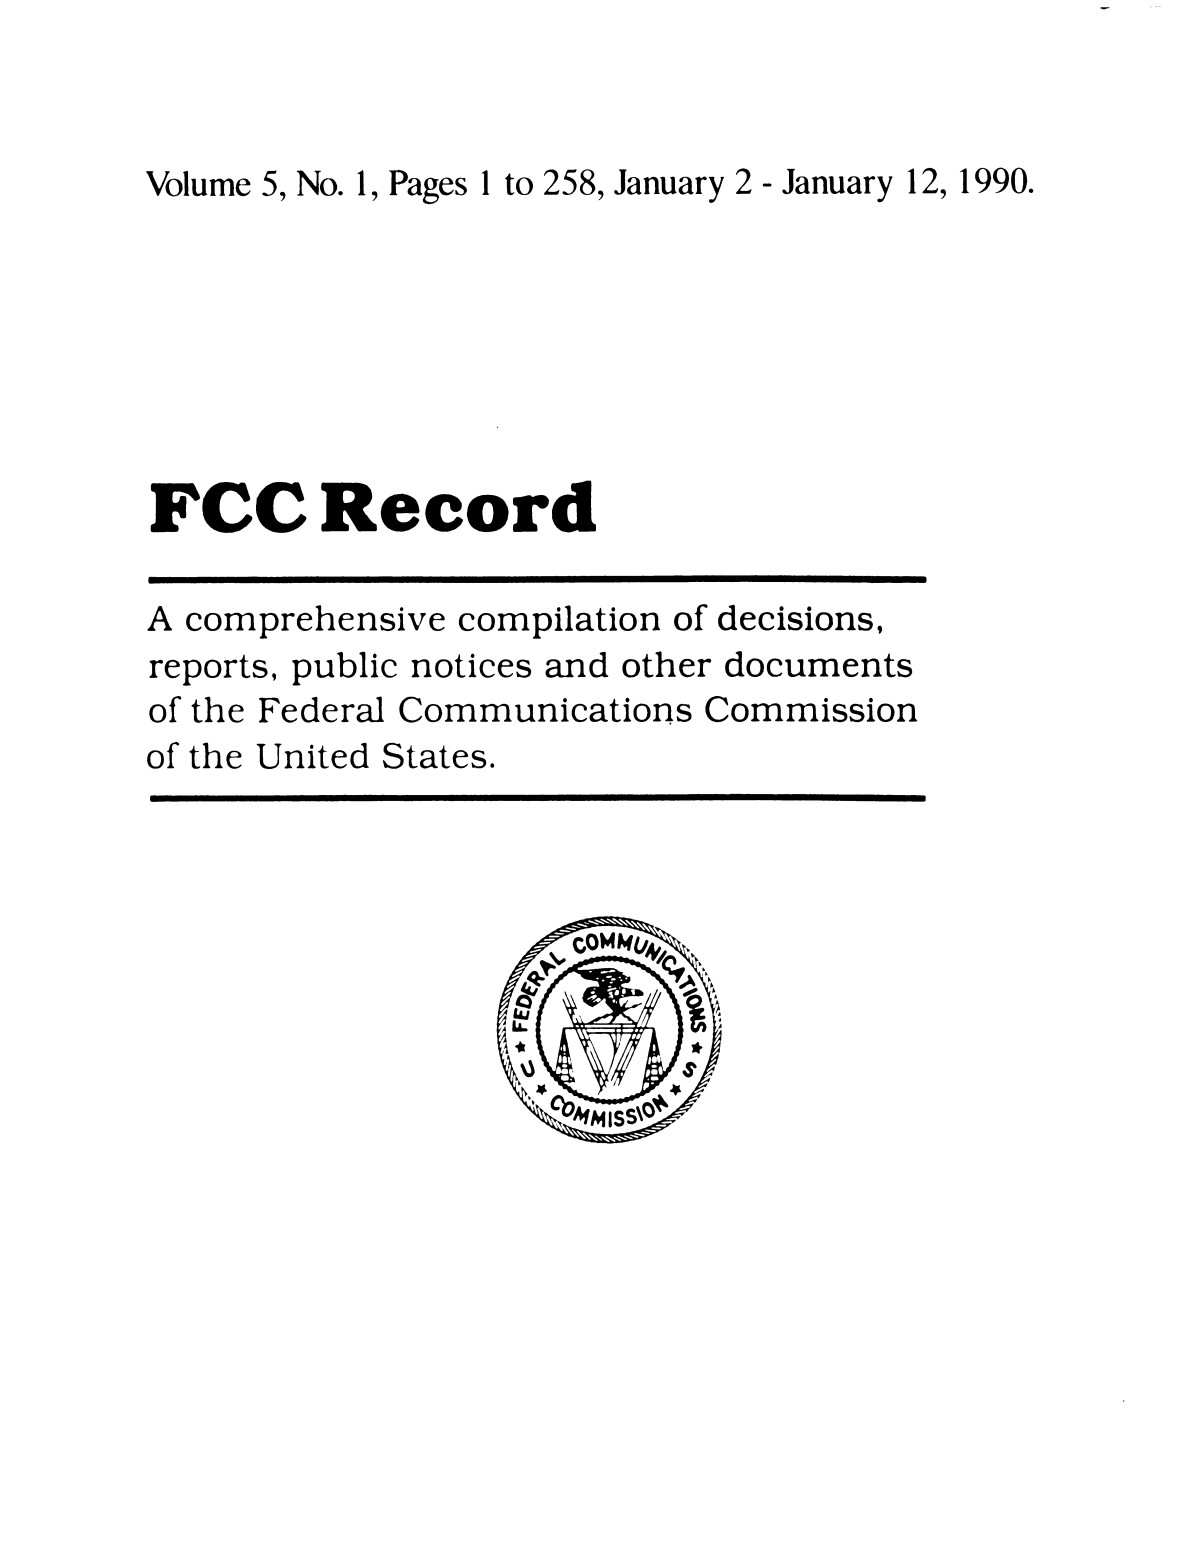 FCC Record, Volume 5, No. 1, Pages 1 to 258, January 2 - January 12, 1990
                                                
                                                    Front Cover
                                                